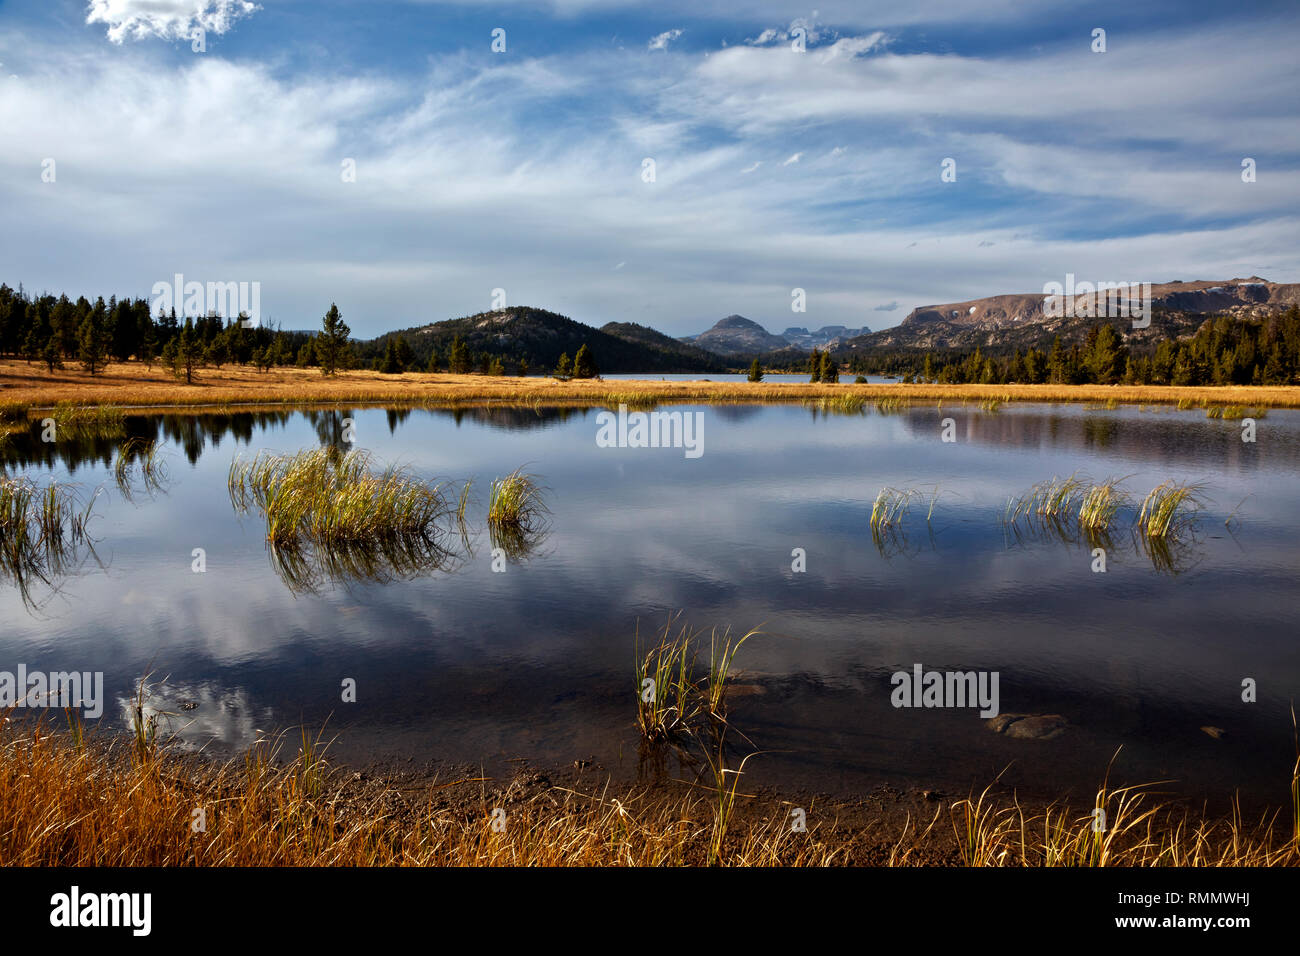 WY03745-00...WYOMING - Small pond and Island Lake located at the edge of the Beartooth Mountains, near the Beartooth Highway, in Shoshone National For Stock Photo